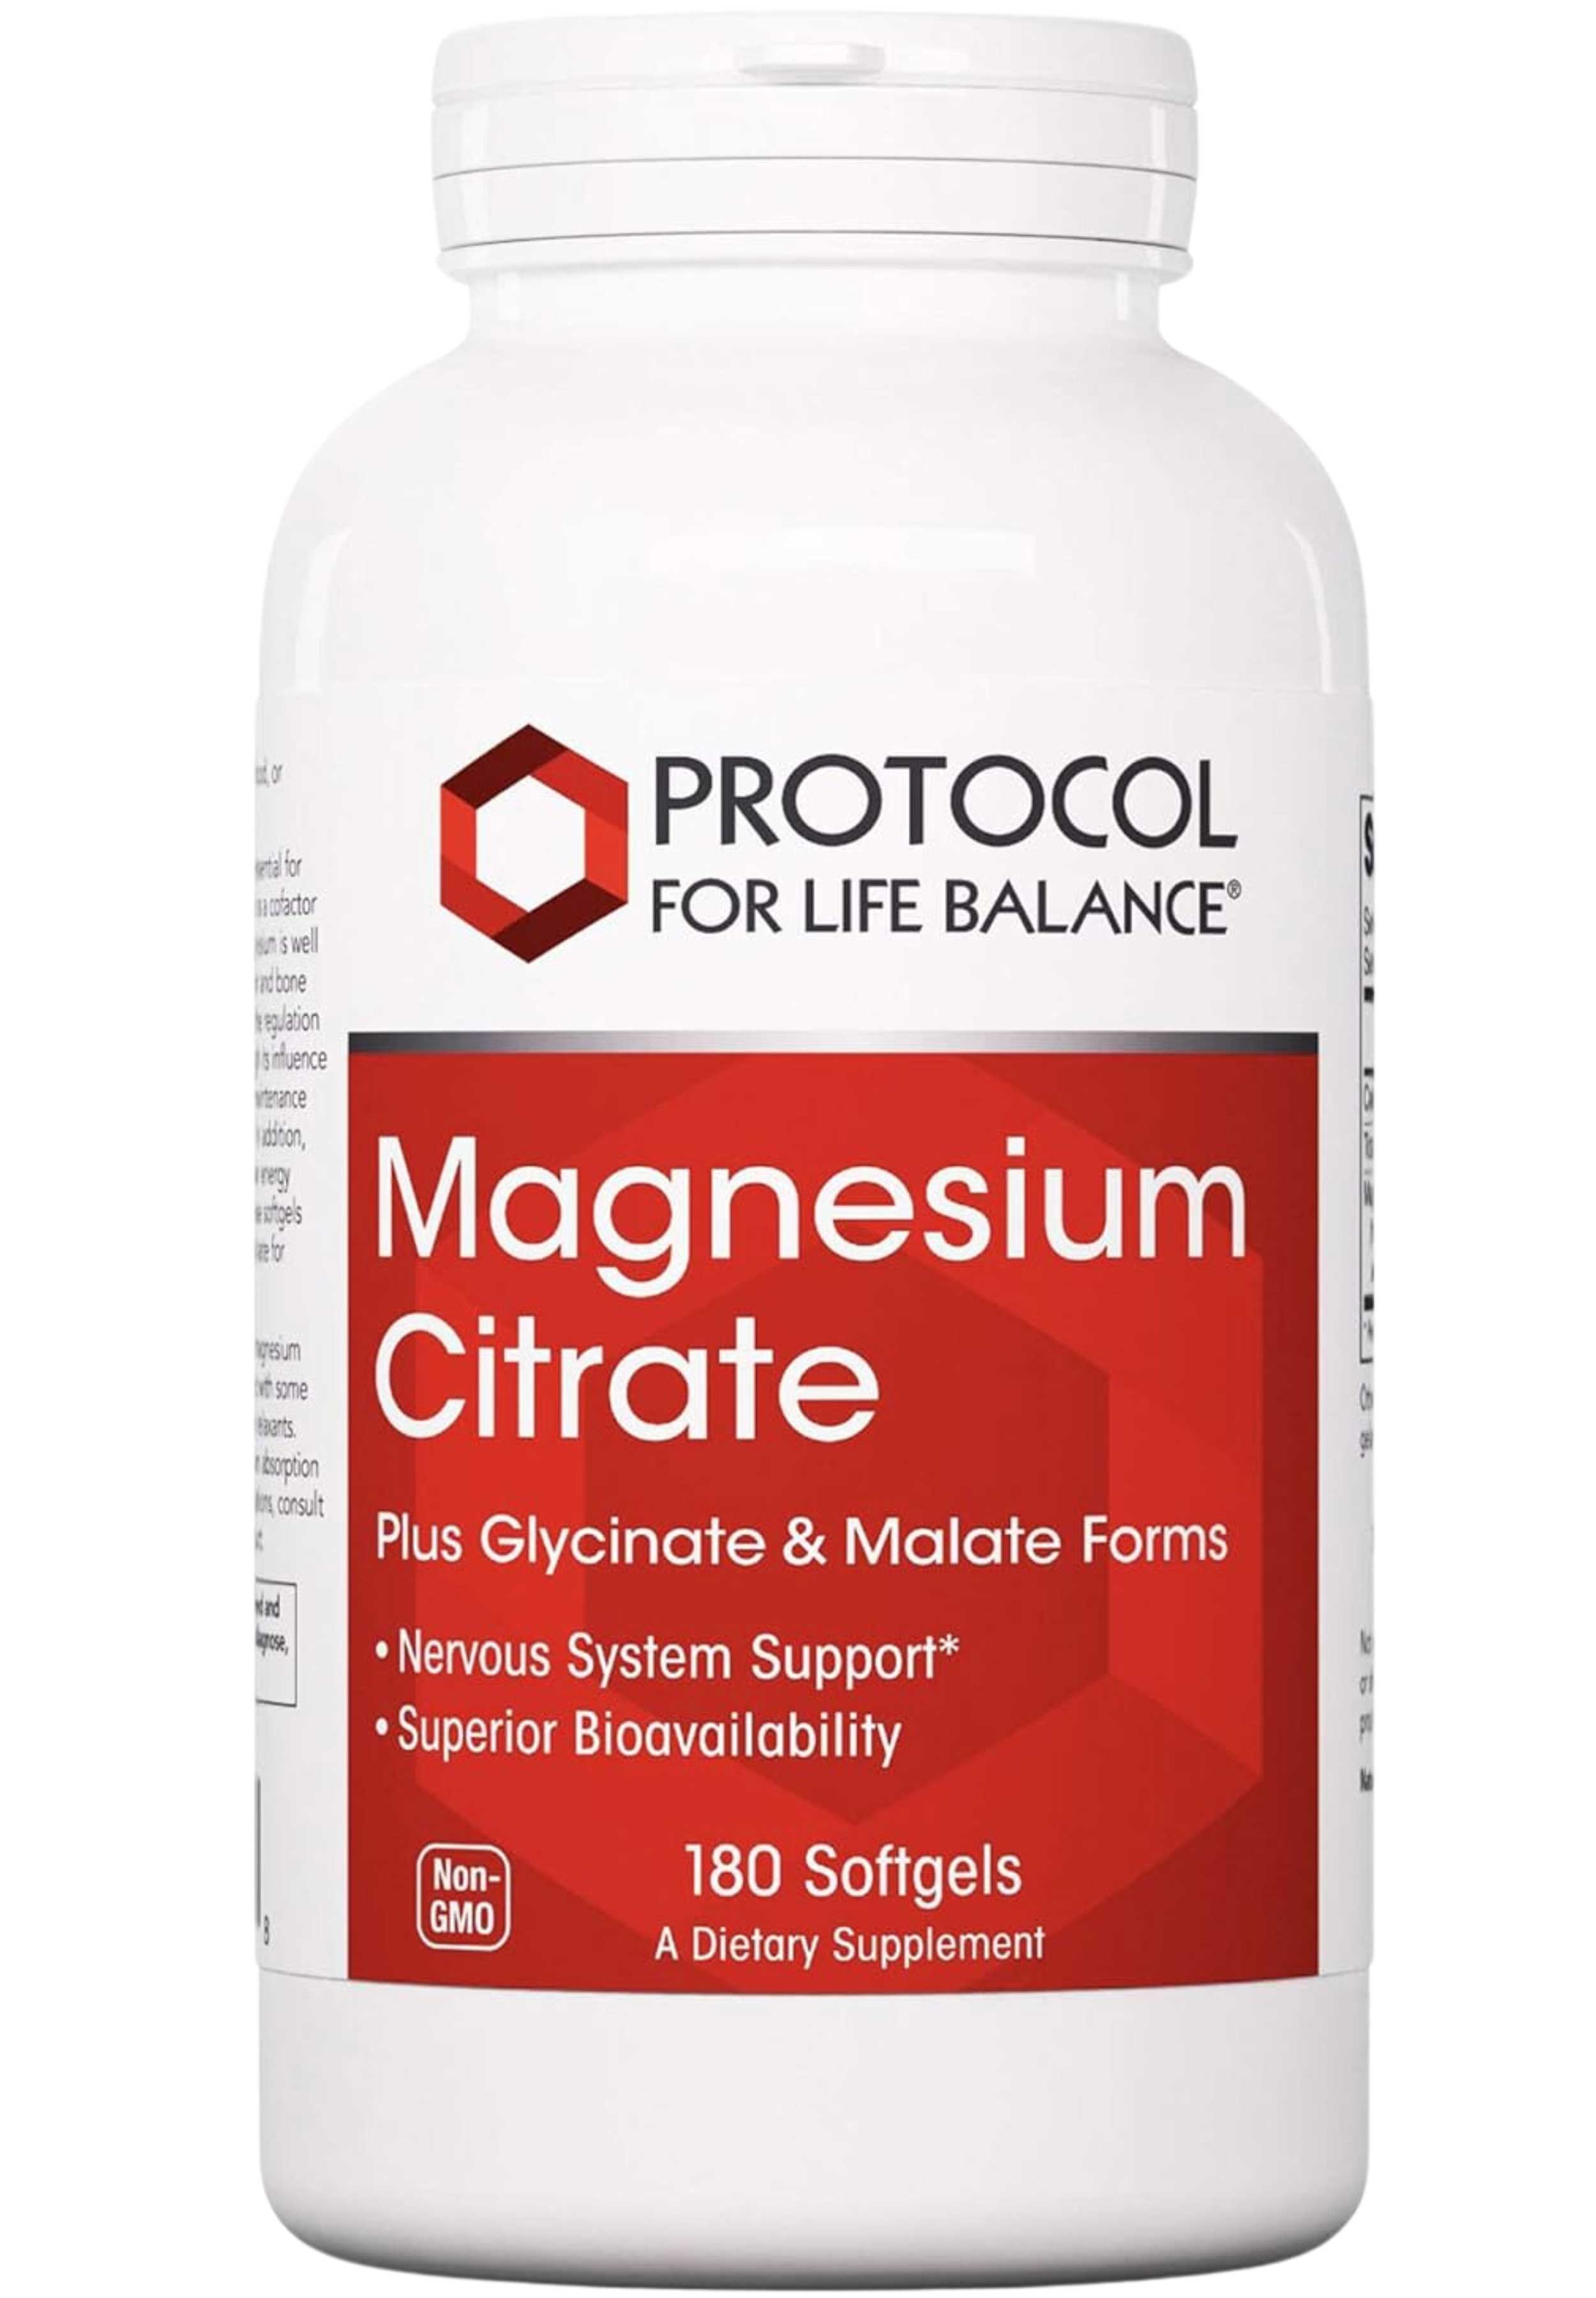 Protocol for Life Balance Magnesium Citrate